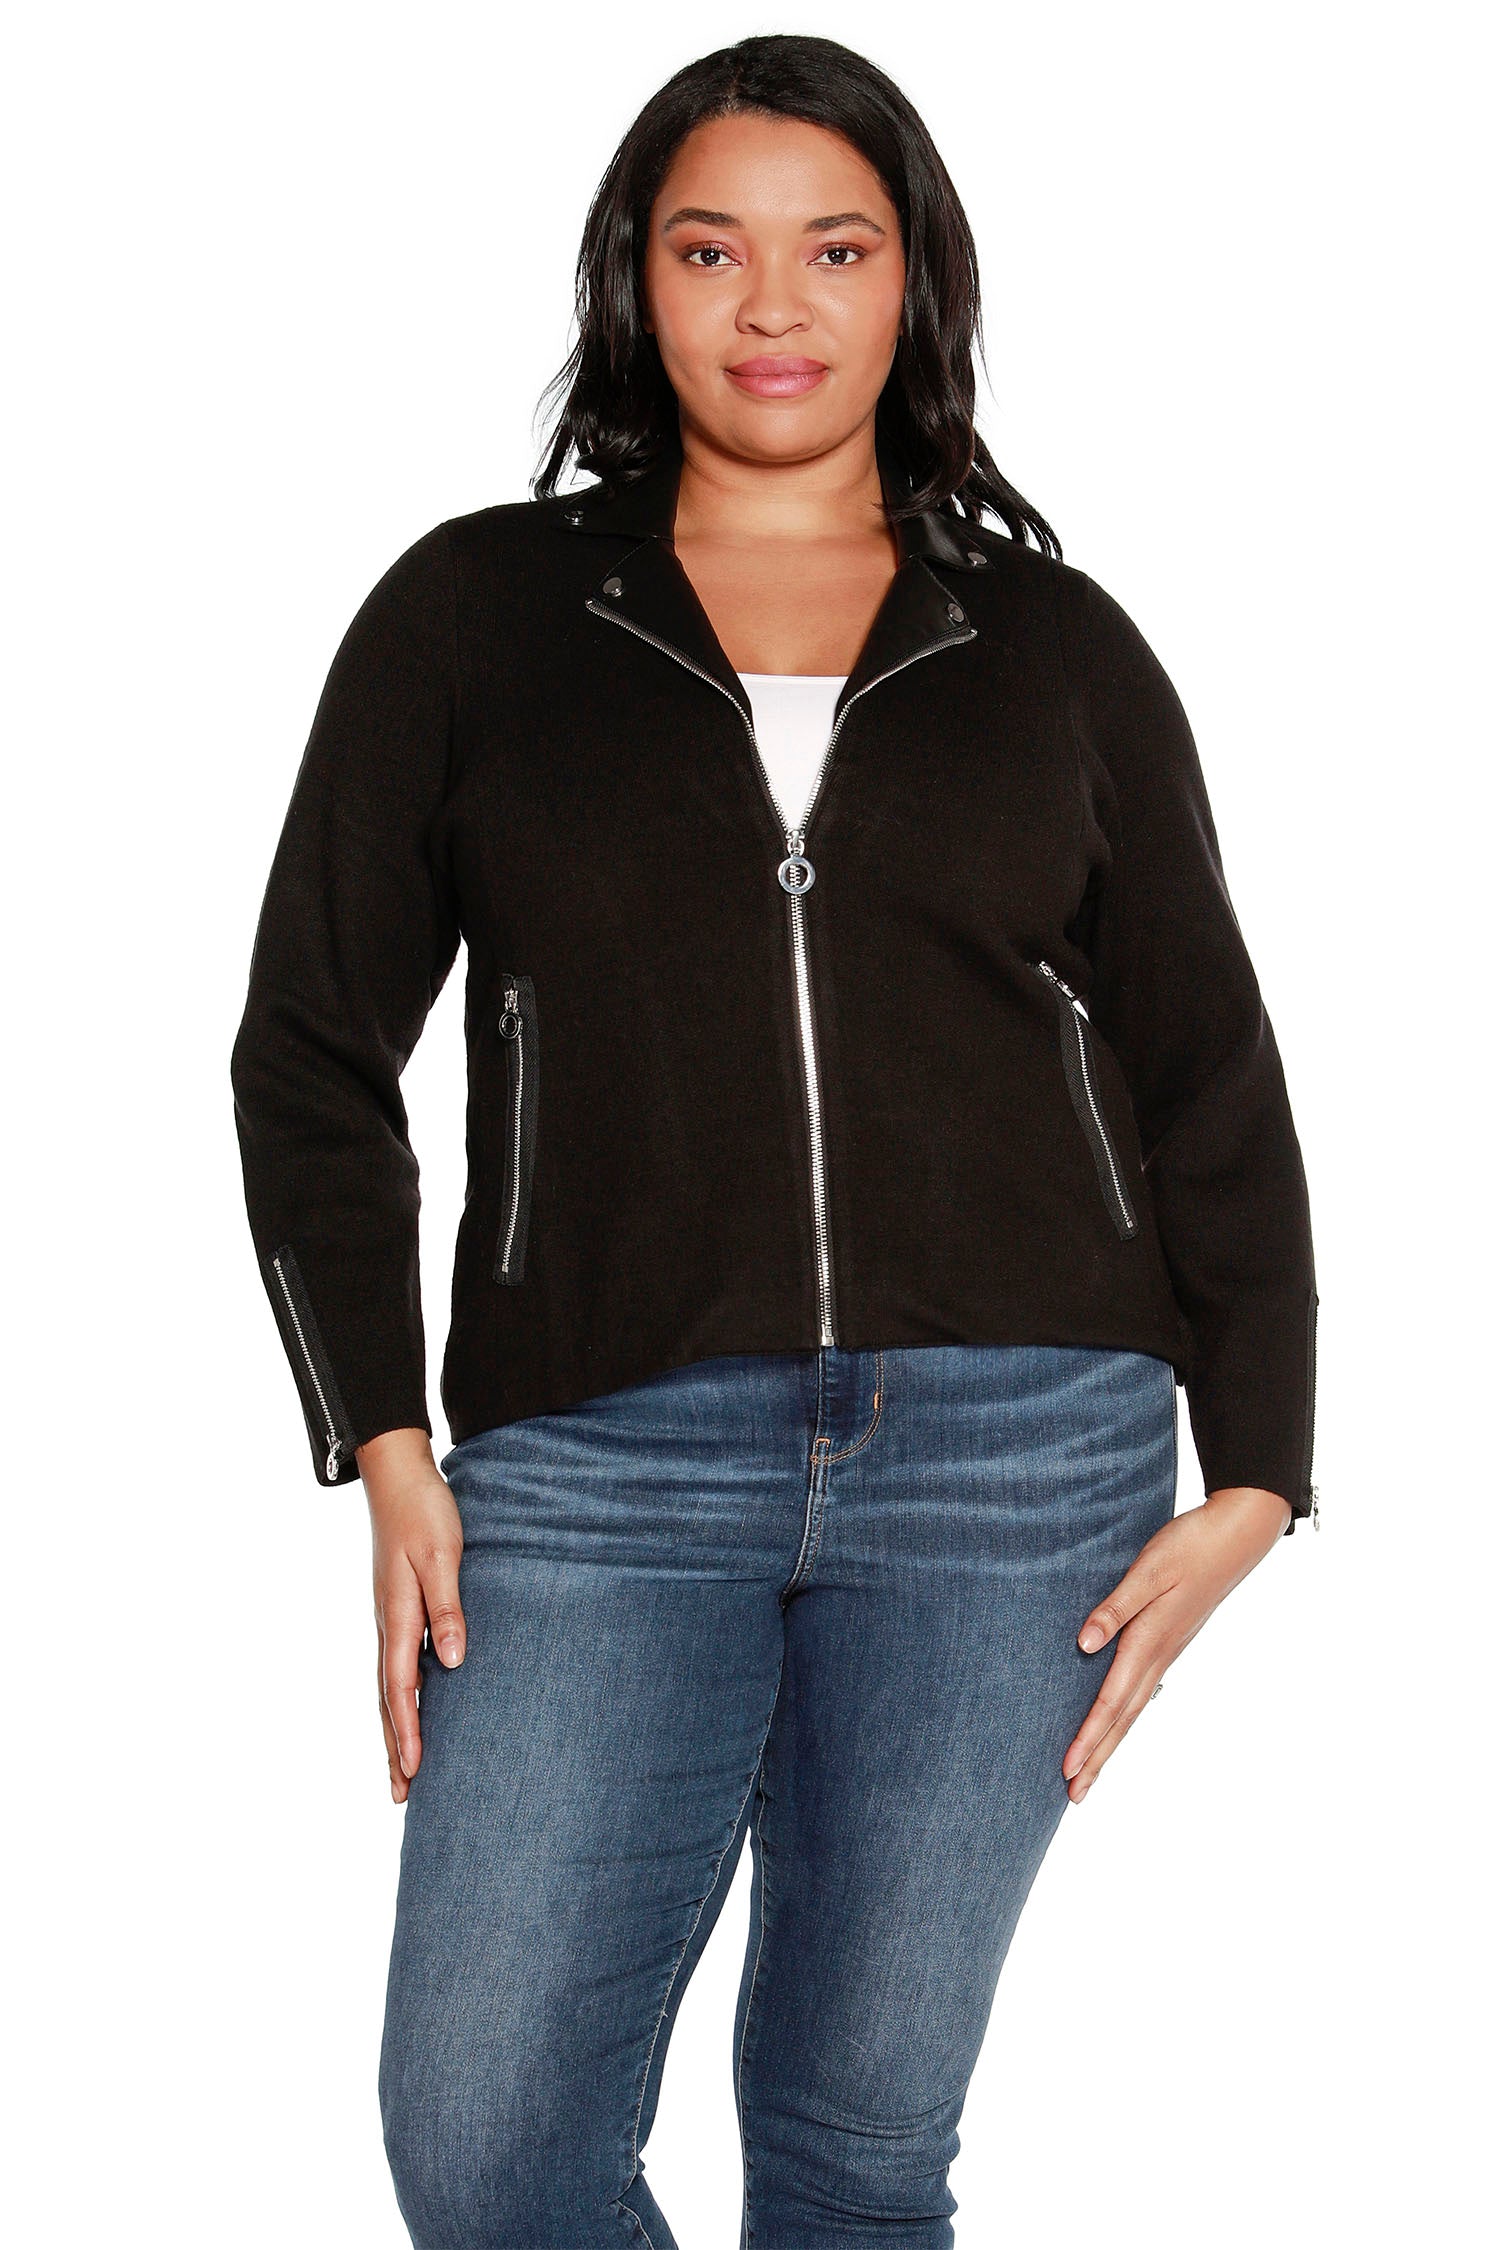 Women's Super Soft Moto-Inspired Jacket with Vegan Leather Collar | Curvy